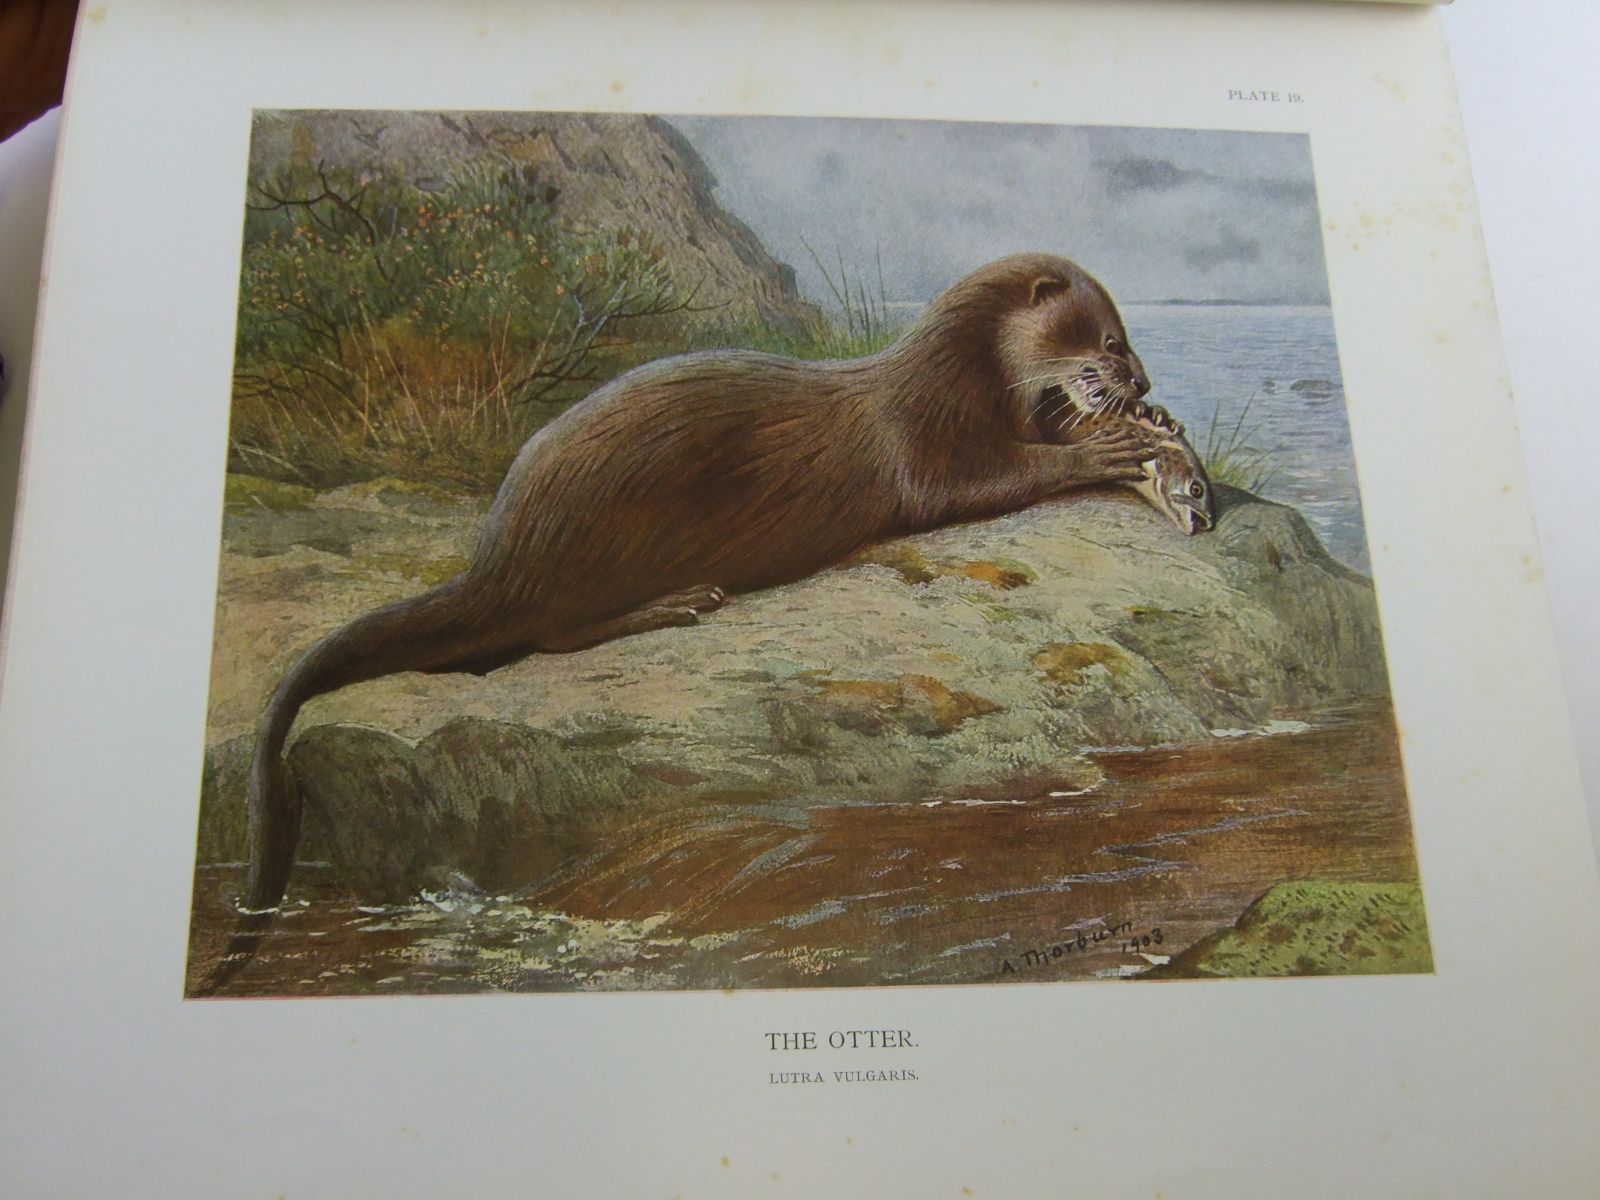 Photo of THE MAMMALS OF GREAT BRITAIN AND IRELAND written by Millais, J.G. illustrated by Millais, J.G.
Thorburn, Archibald
Lodge, G.E.
Gronvold, Henrik published by Longmans, Green & Co. (STOCK CODE: 1706435)  for sale by Stella & Rose's Books